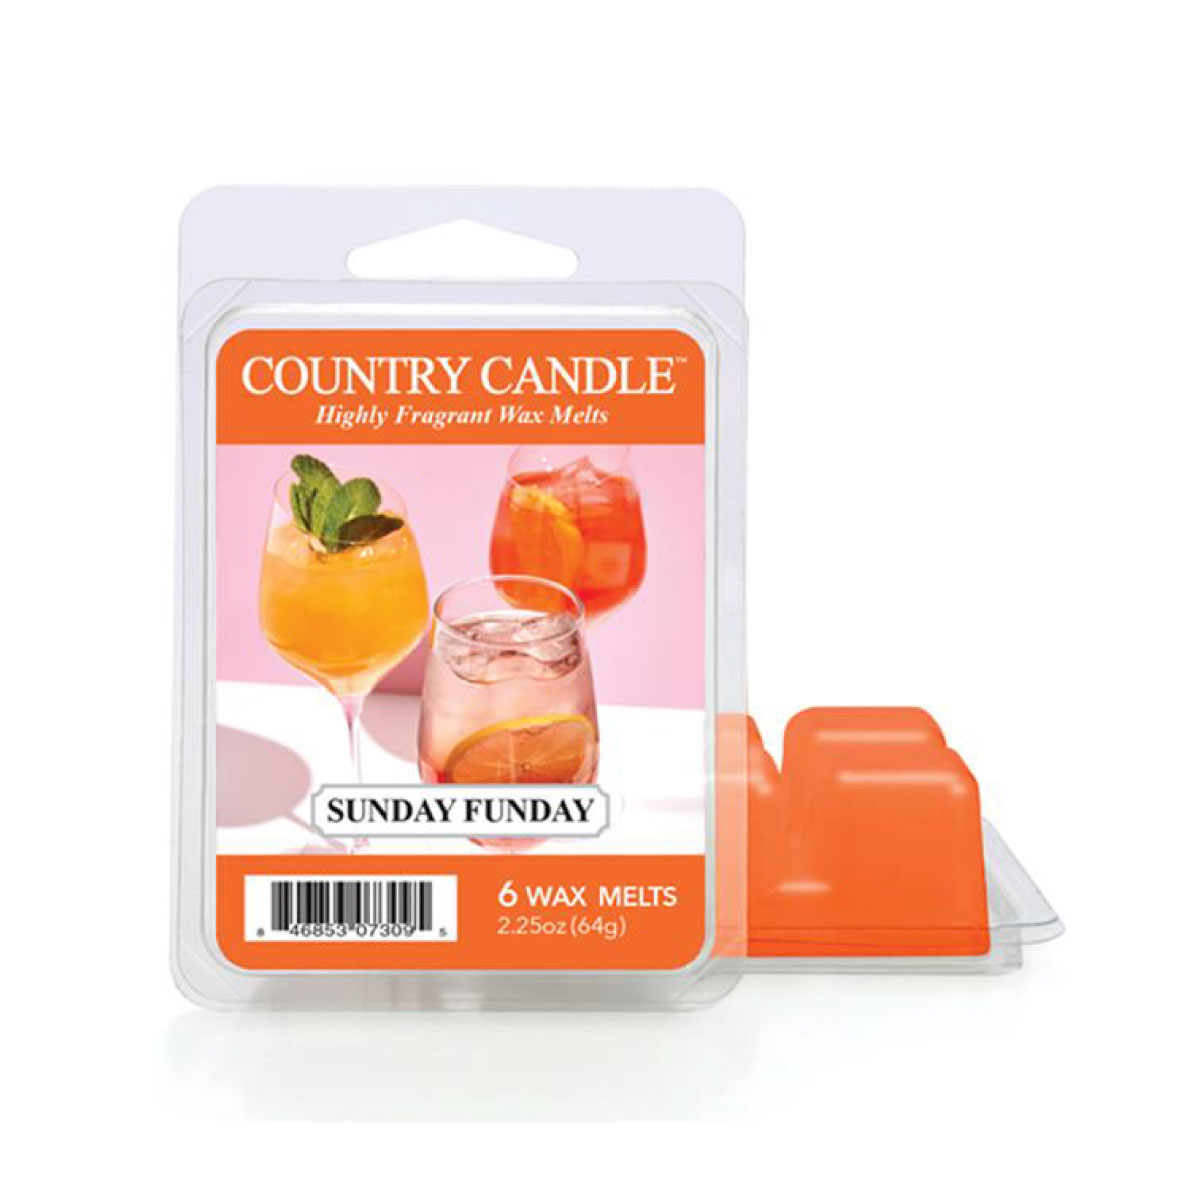 Sunday Funday - Wax Melt 64g von Country Candle™